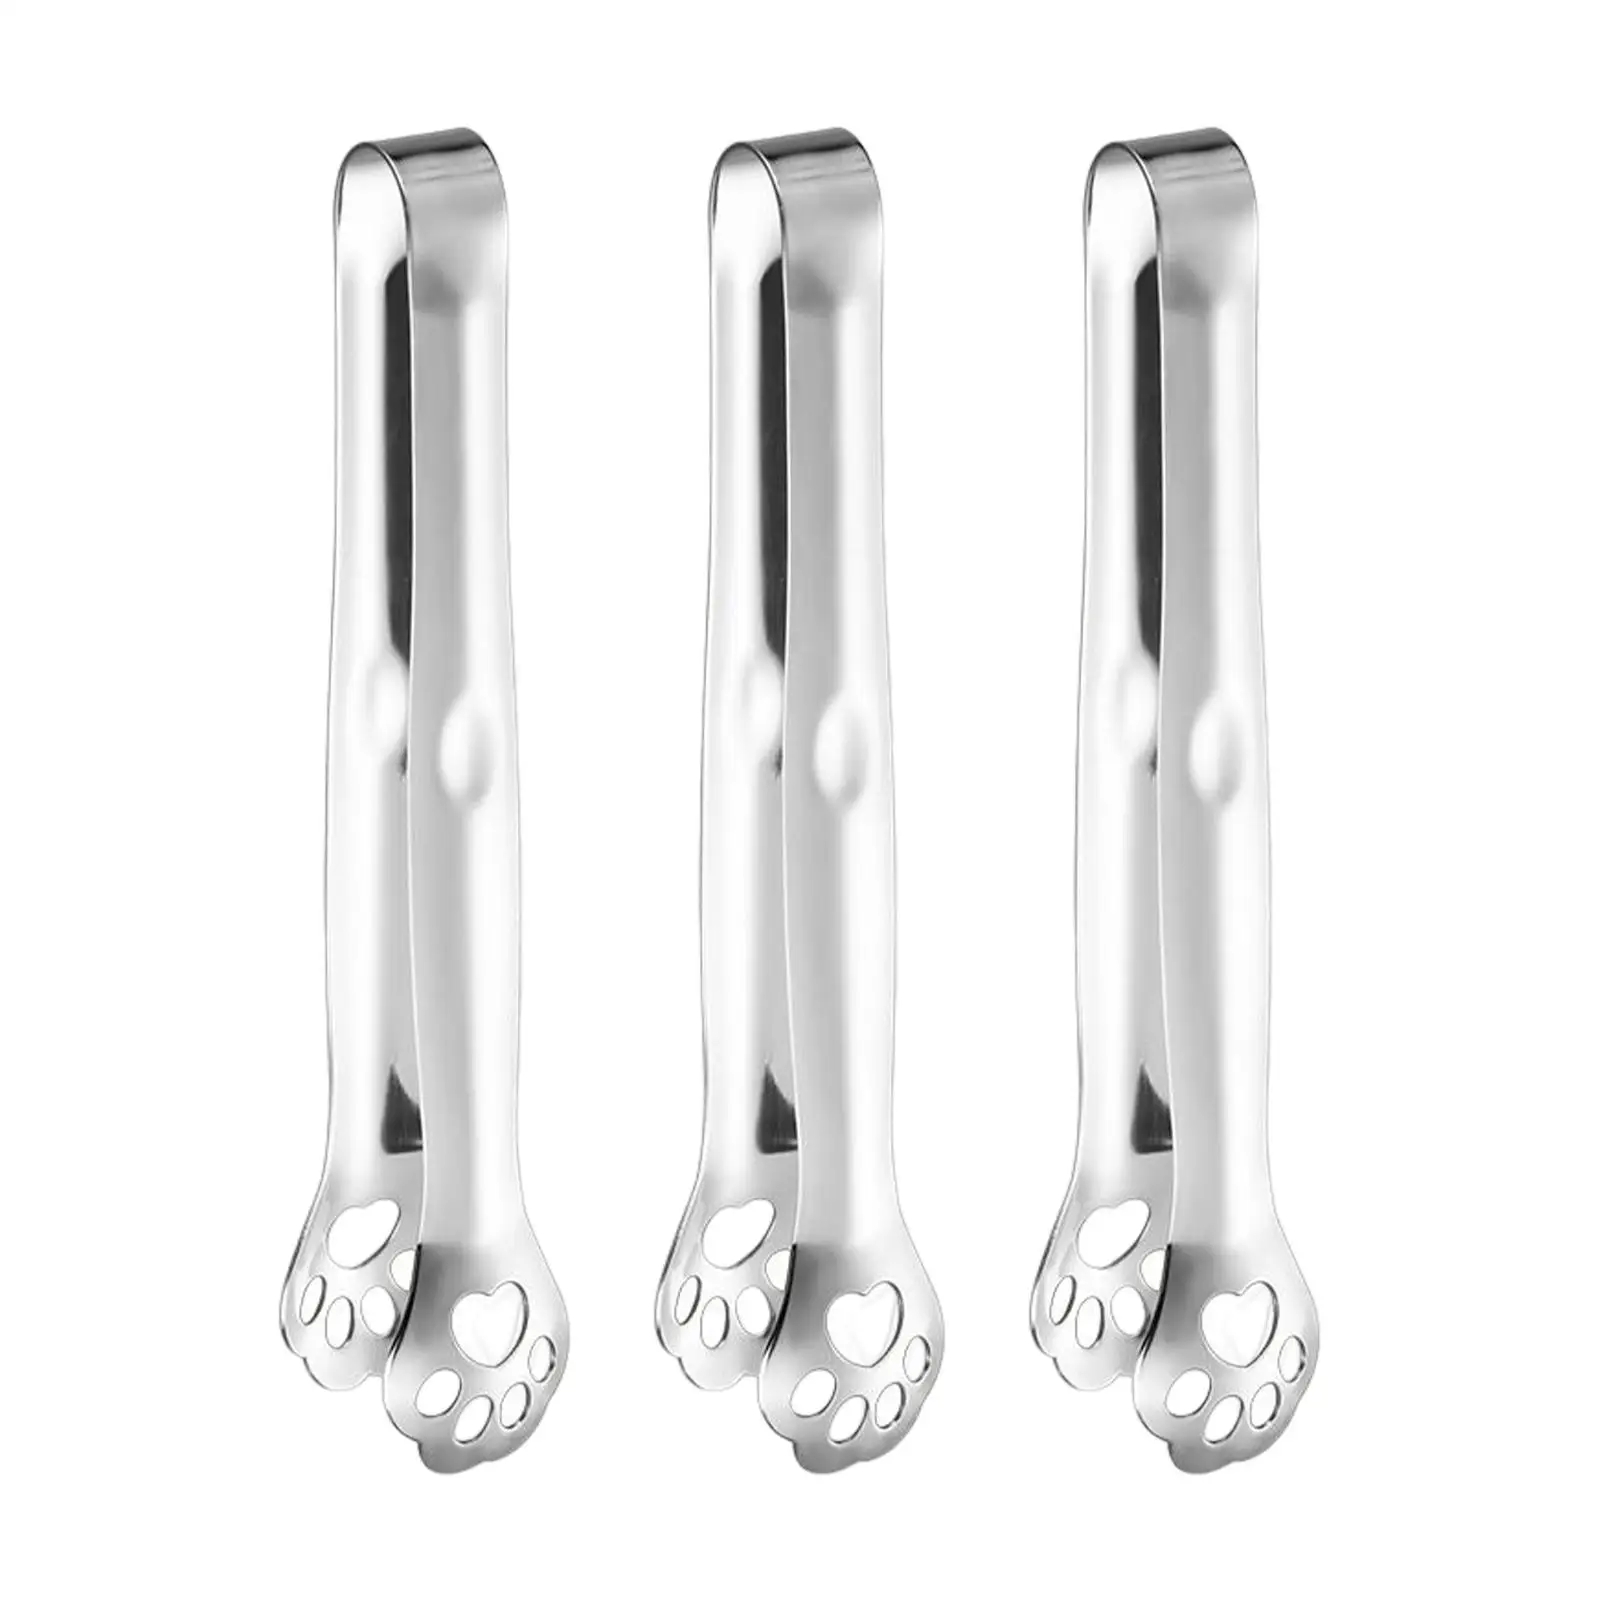 3x Stainless Steel Food Clips Cooking Food Clips Buffet Clip Roast Clip Baking Bread Clamp for Grilling Cooking Frying BBQ